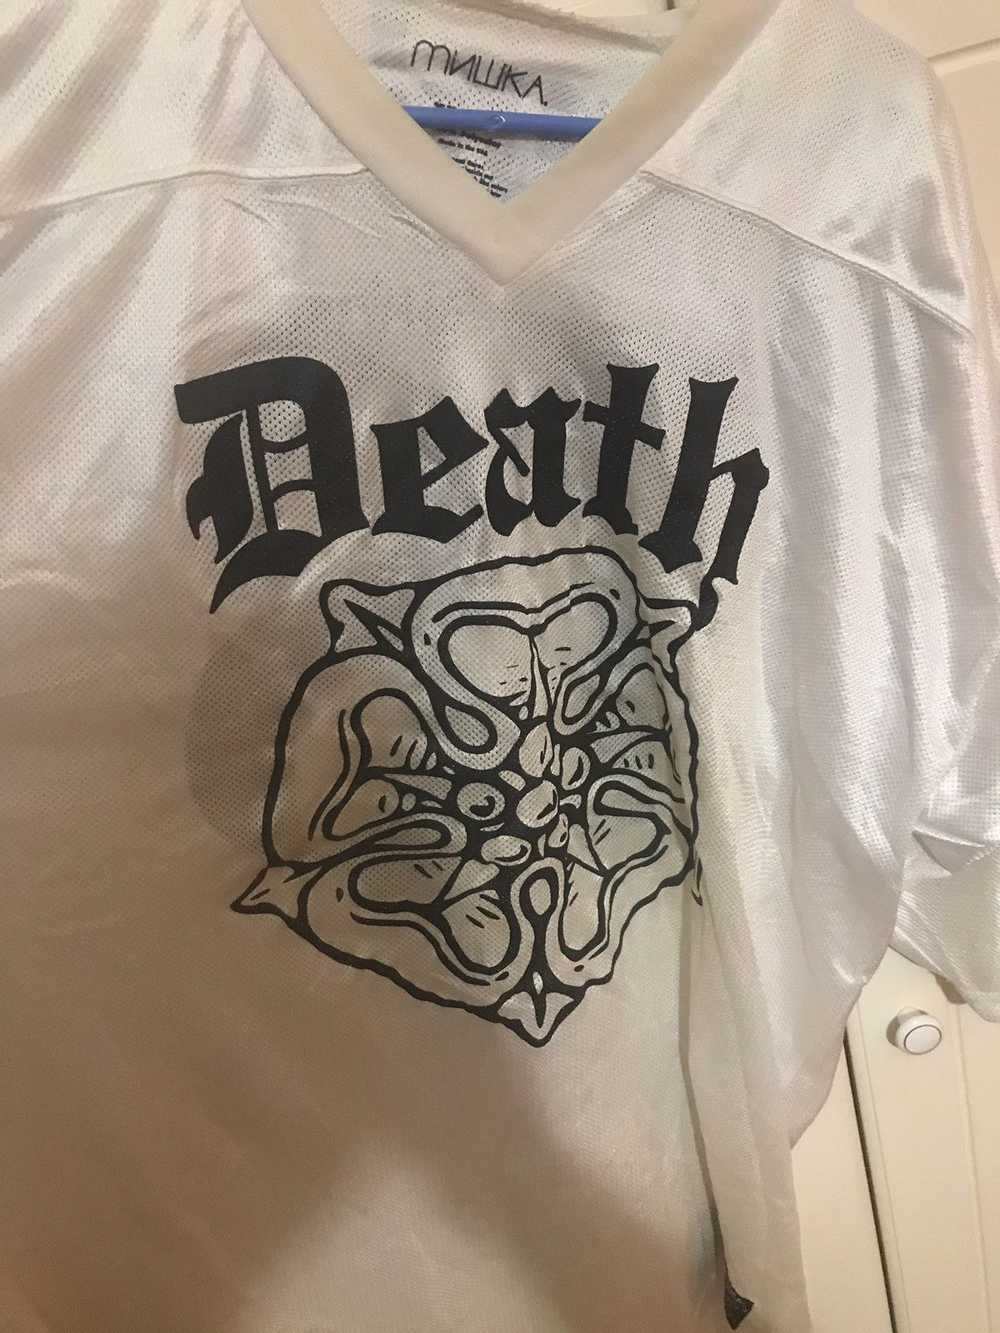 Mishka Jersey signed by Pouya,Ghoste and Fat Nick - image 2